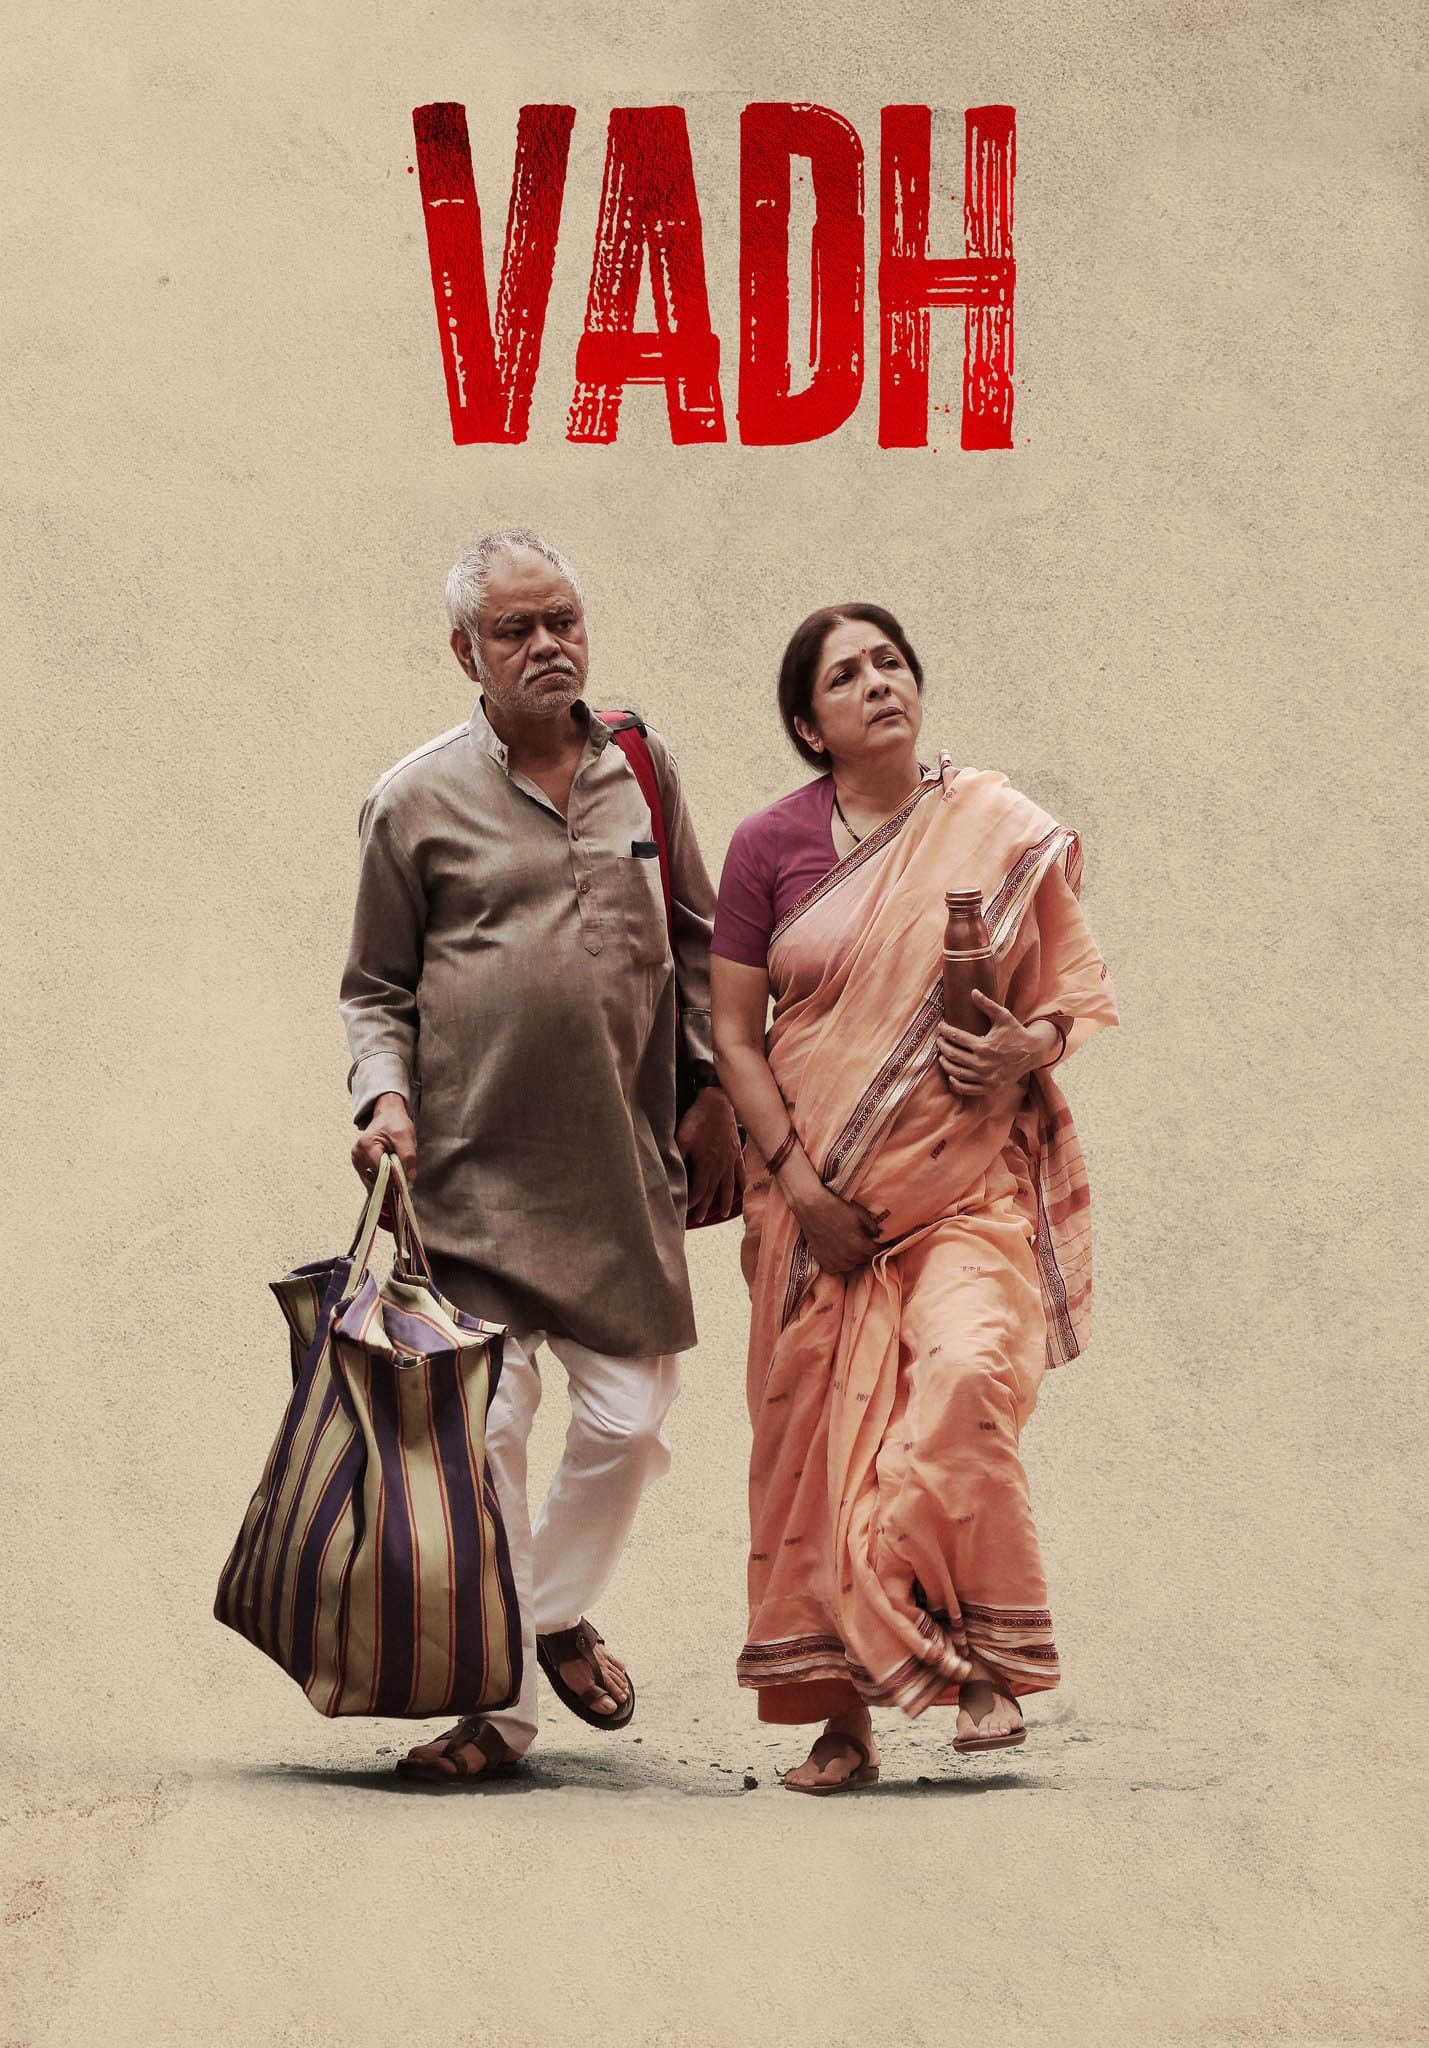 Poster for the movie "Vadh"